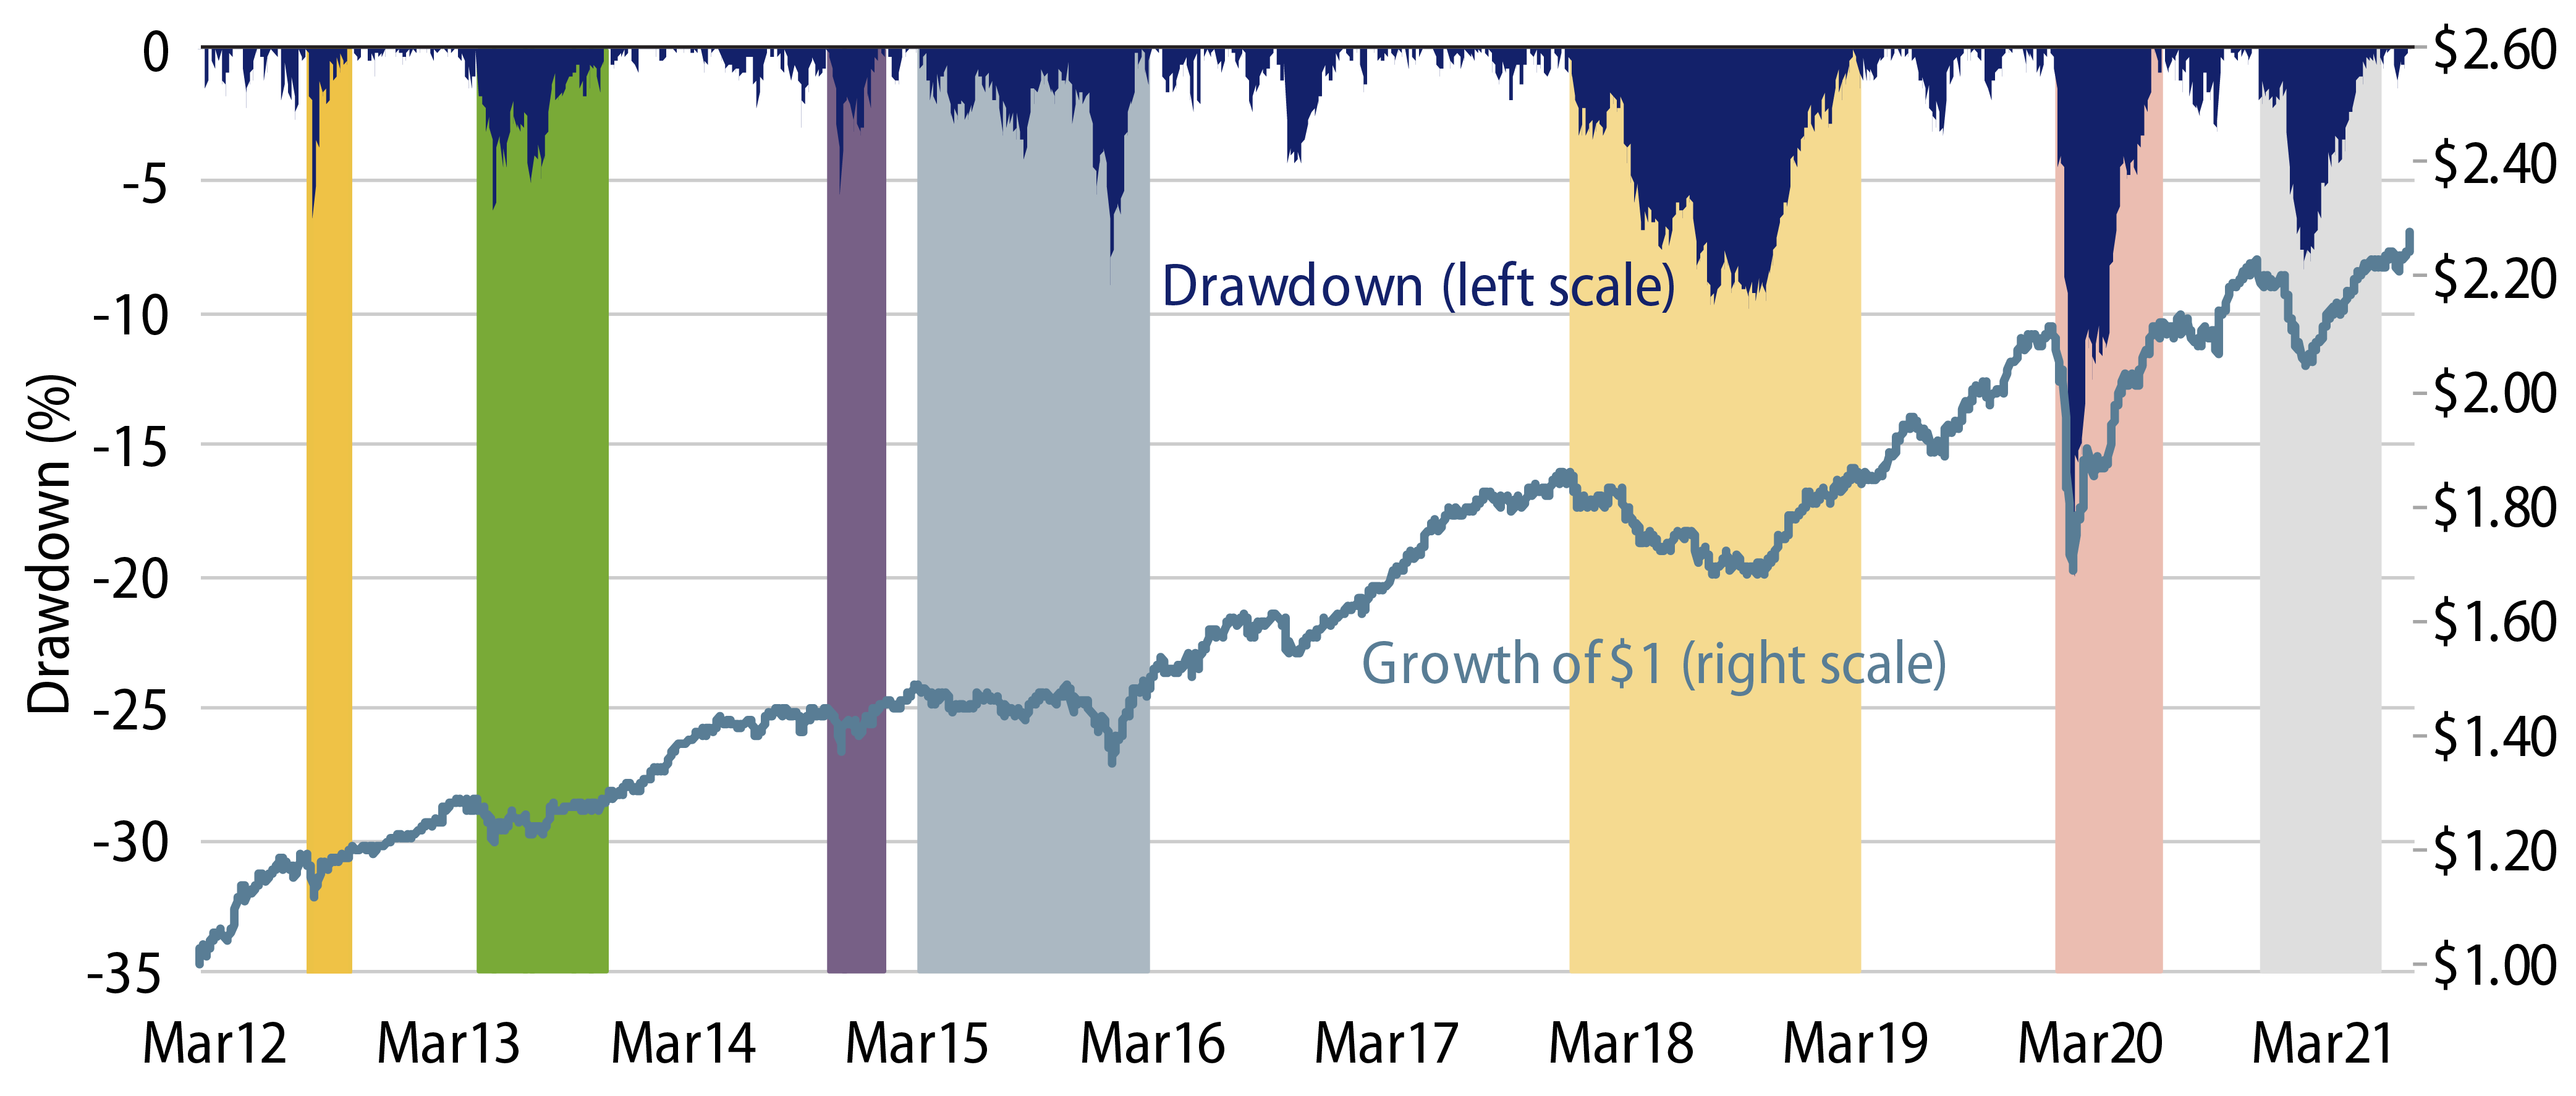 Macro Opportunities Drawdowns and Negative Performance